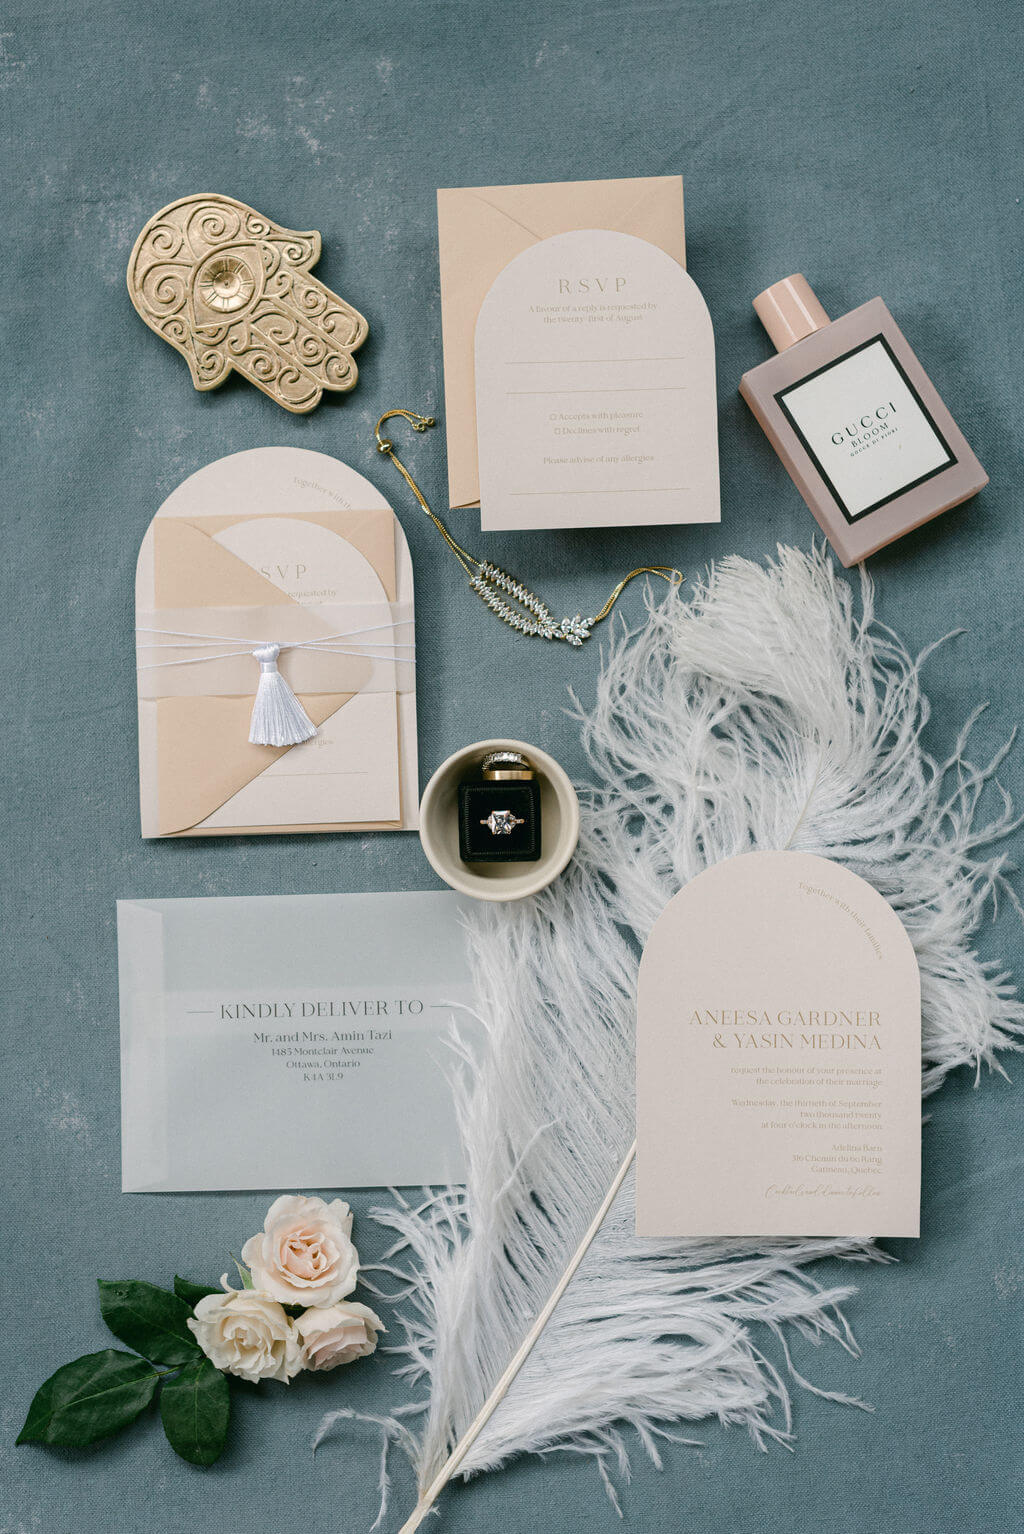 Dome shaped wedding invitation with tassel and vellum envelope